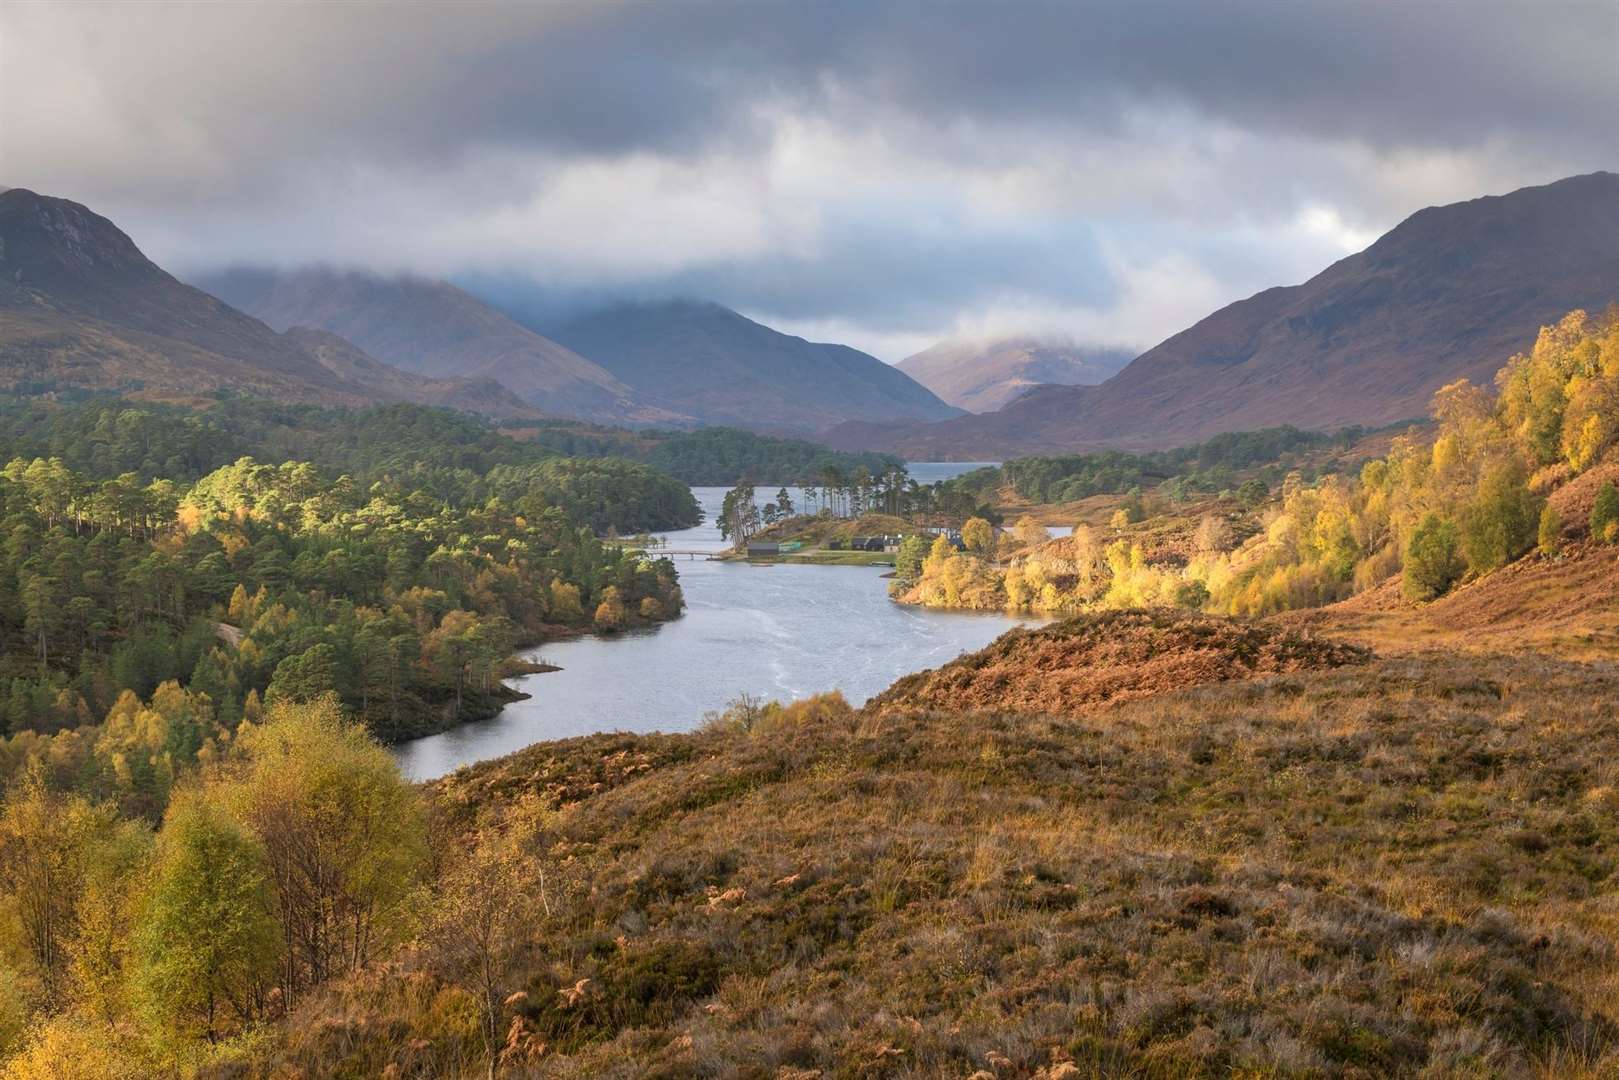 It is hoped that scenic Highland landscapes such as Glen Affric can attract international visitors and help rebuild the country’s tourism industry.